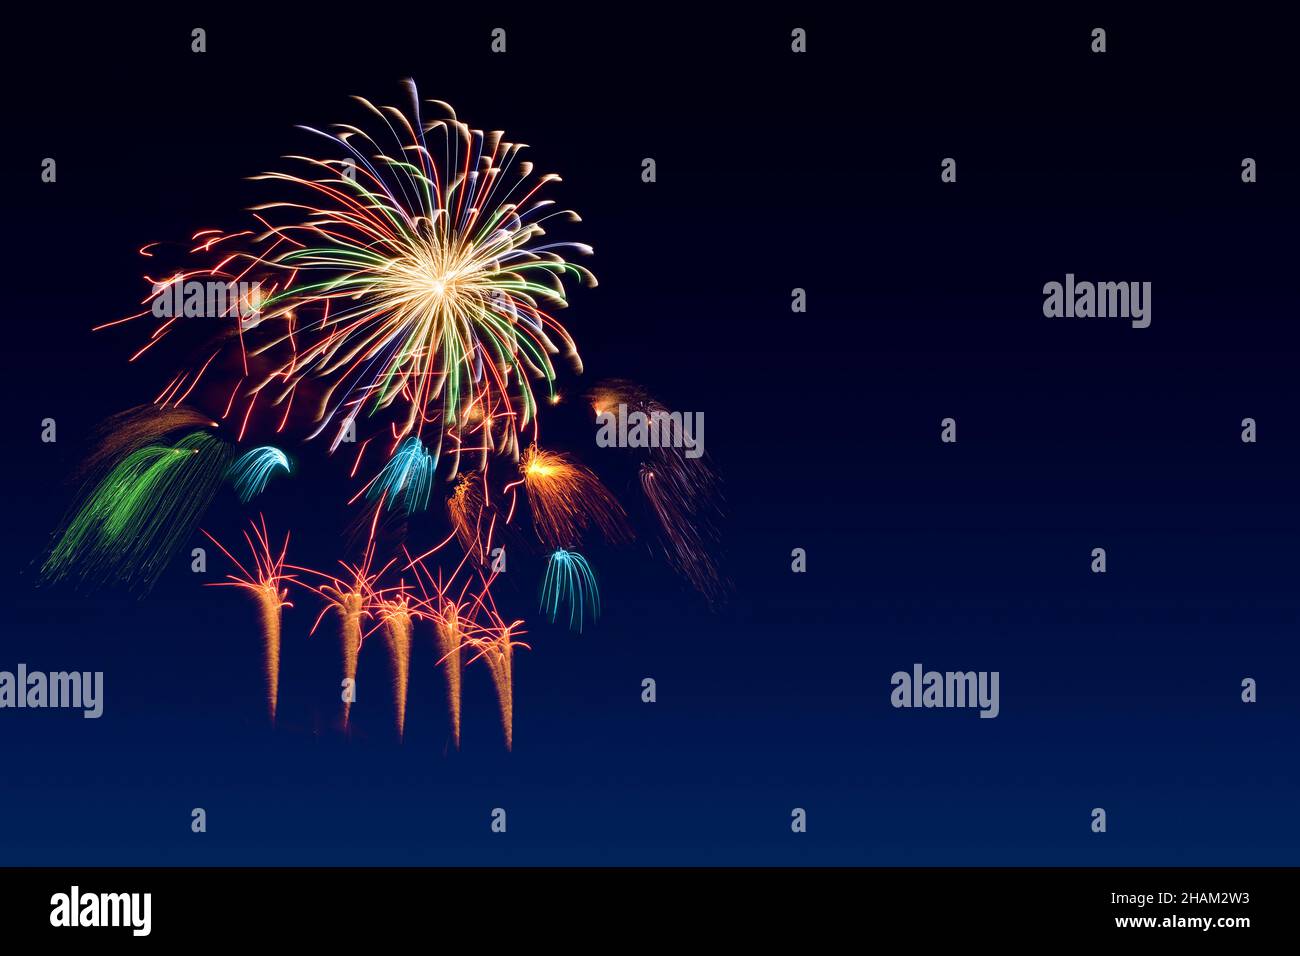 Colorful fireworks celebration and the twilight sky background with copyspace at the bottom of image. Stock Photo